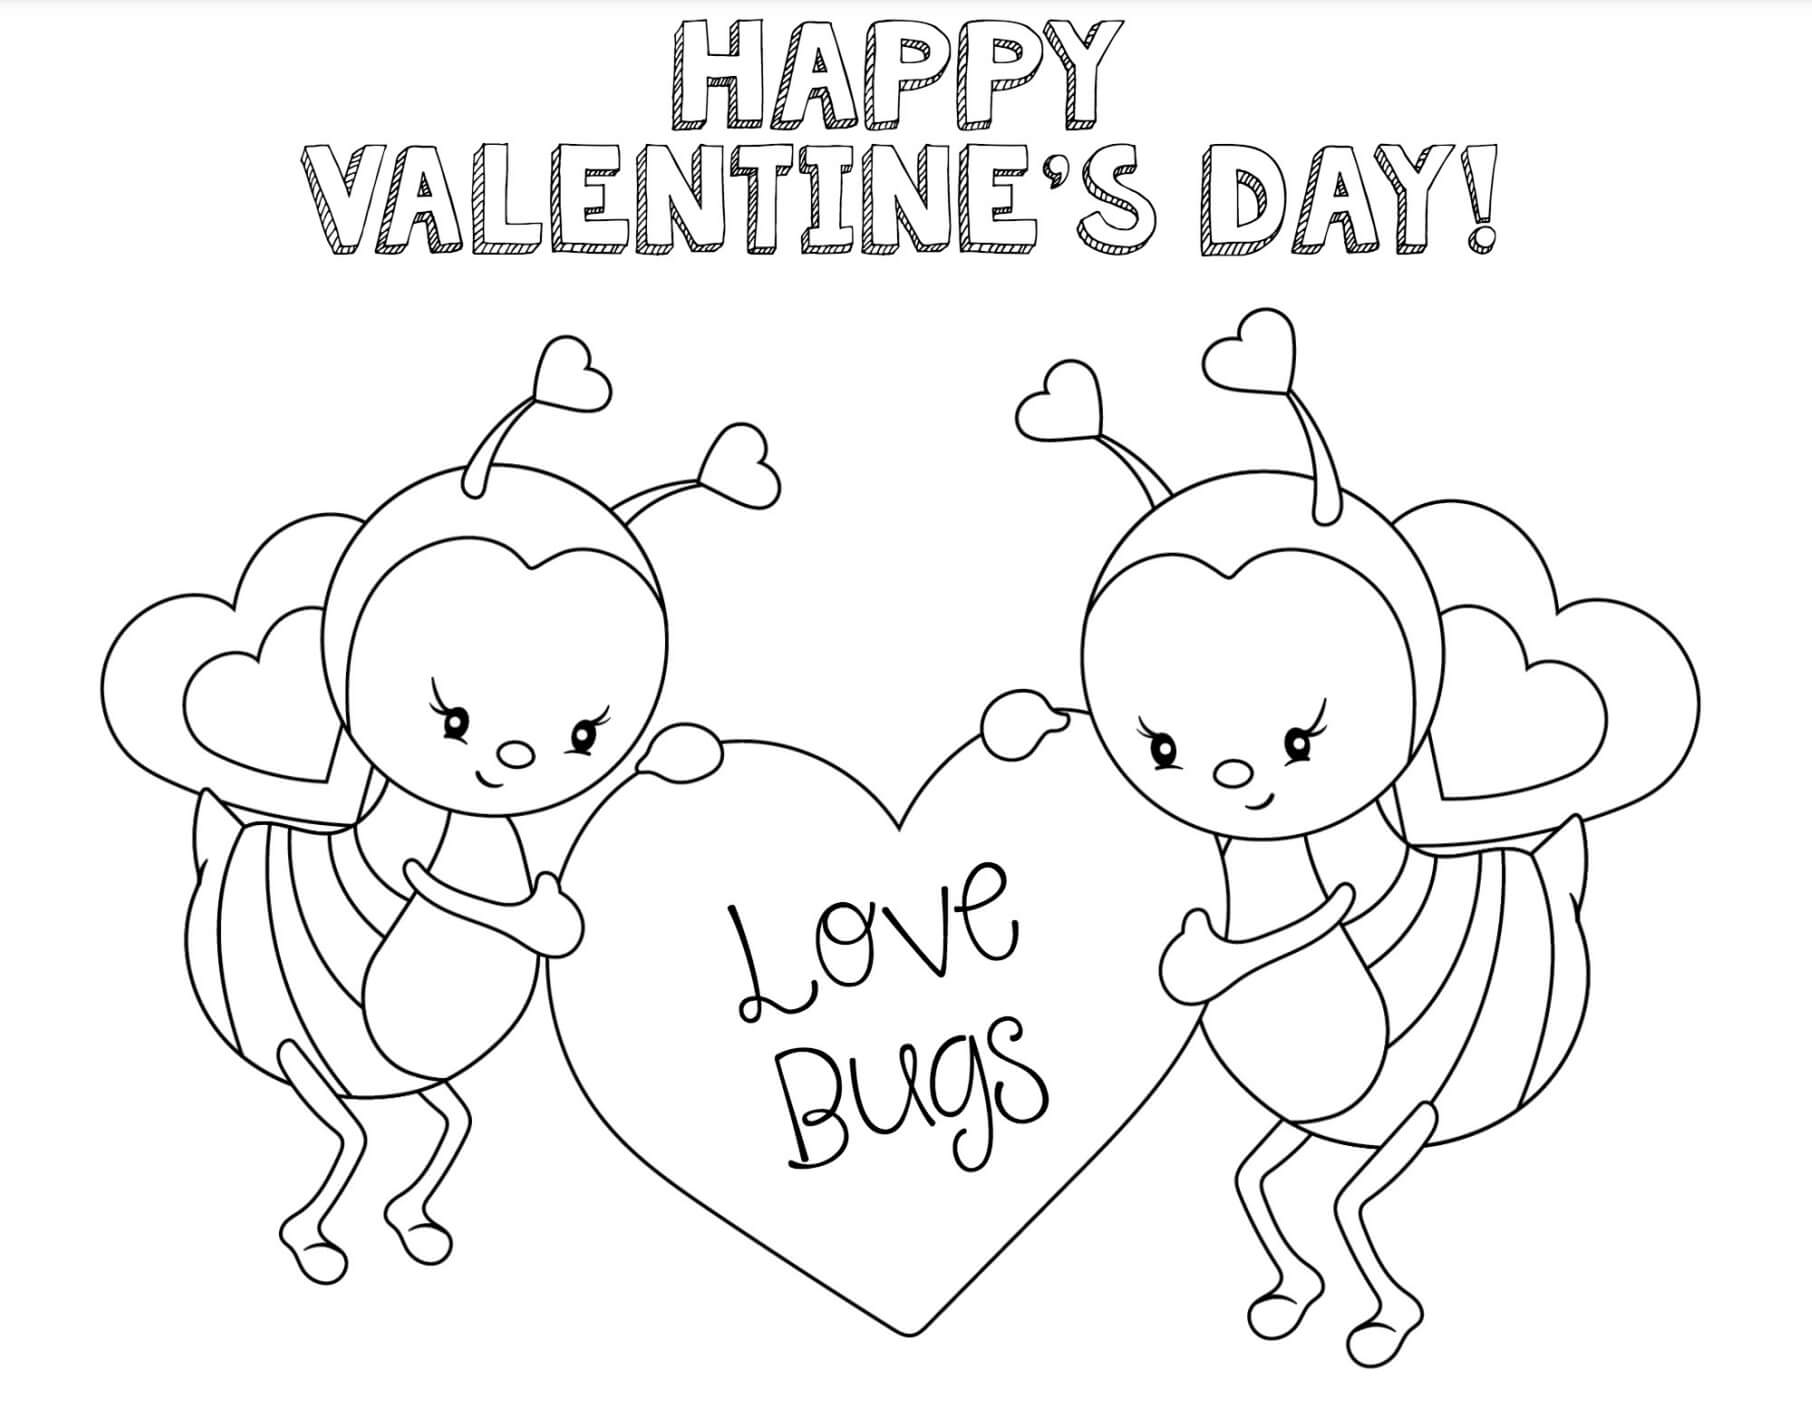 Two Bees in Happy Valentine's Day